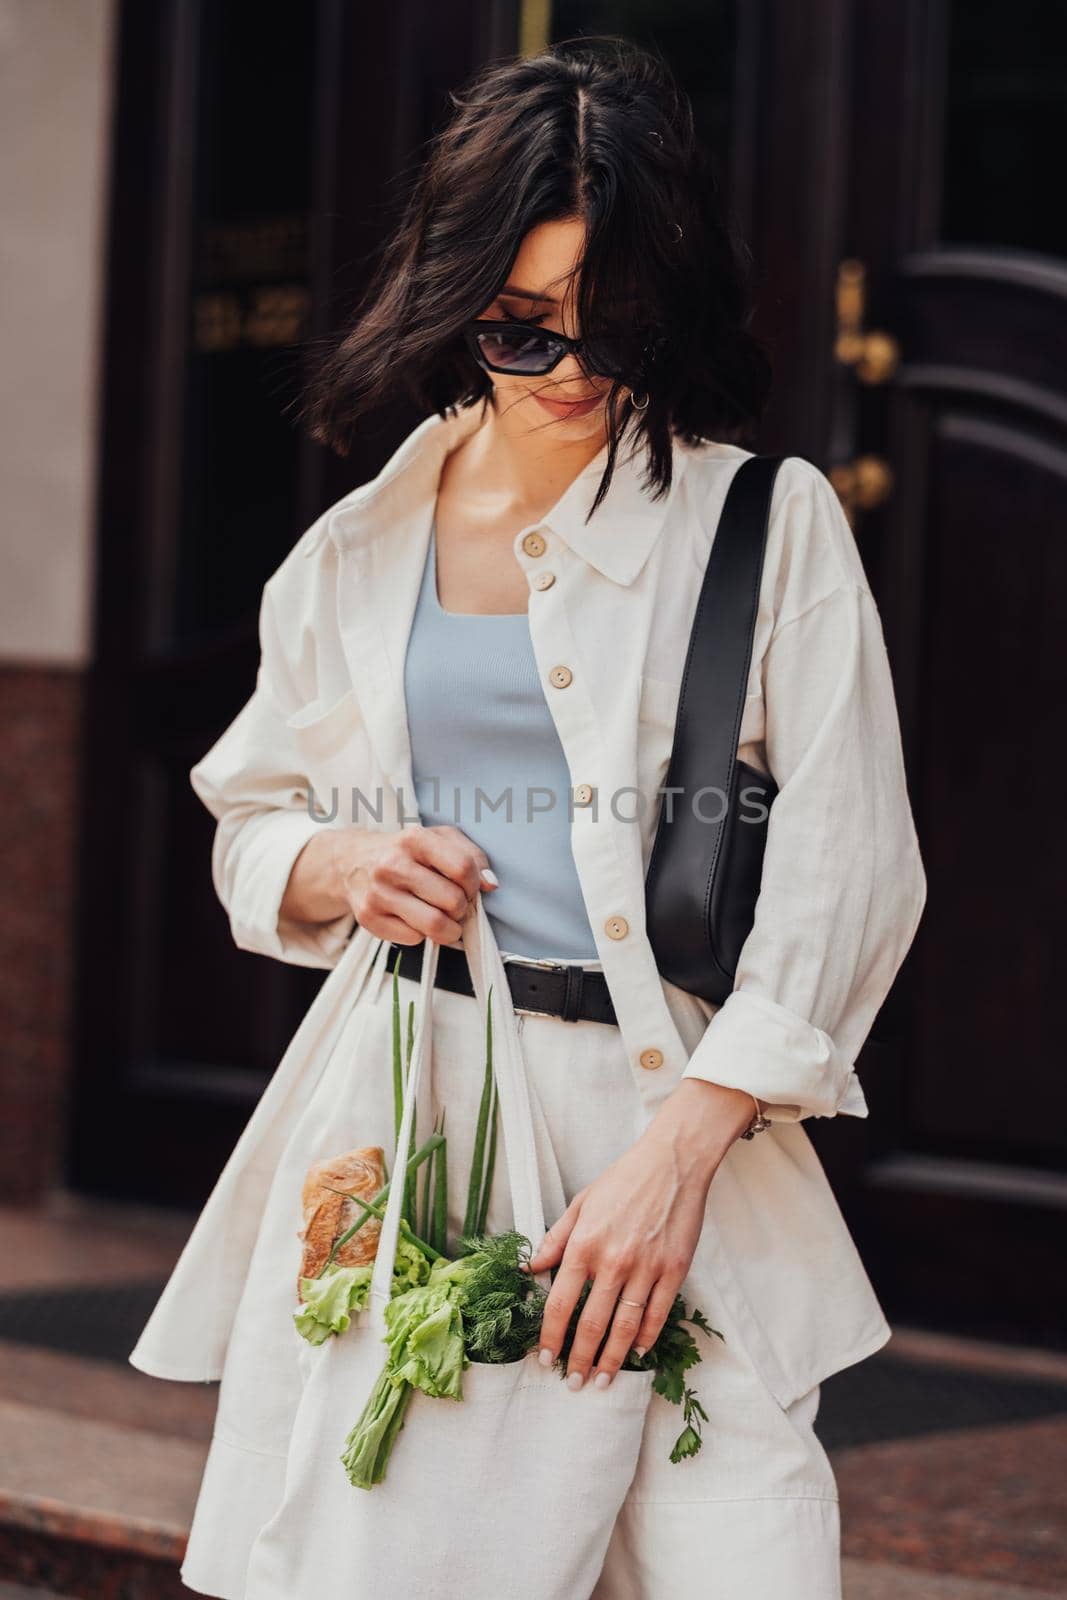 Stylish Young Brunette Woman Holding a Shopping Eco Bag with Groceries Outdoors